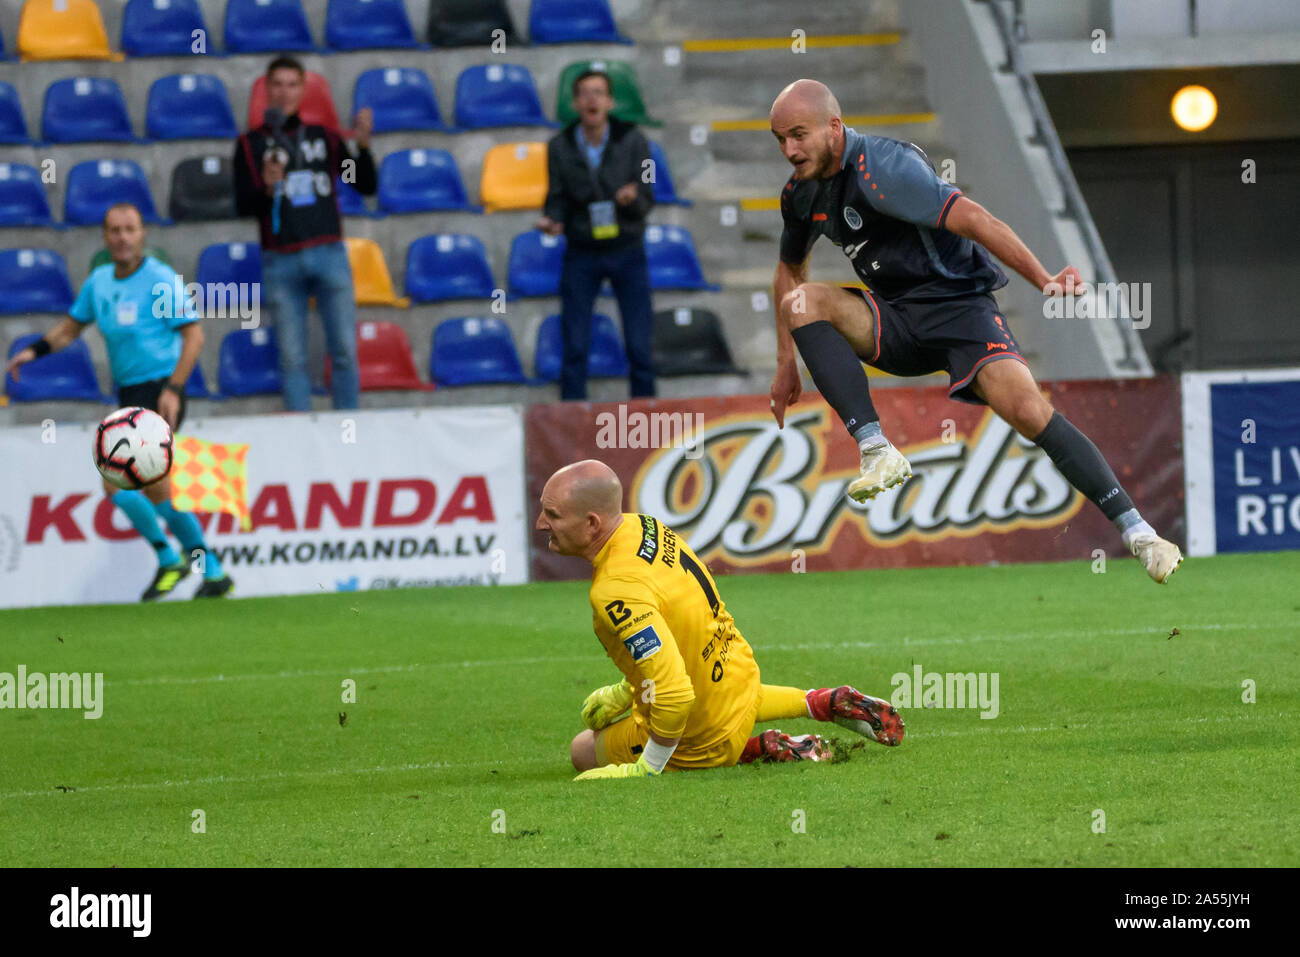 RIGA, LATVIA. 17th of July, 2019. Gary Rogers (L) and Roman Debelko (R), during UEFA Champions League 1st round 2nd leg football game between RIGA FC and DUNDALK FC. Skonto stadium, Riga Stock Photo